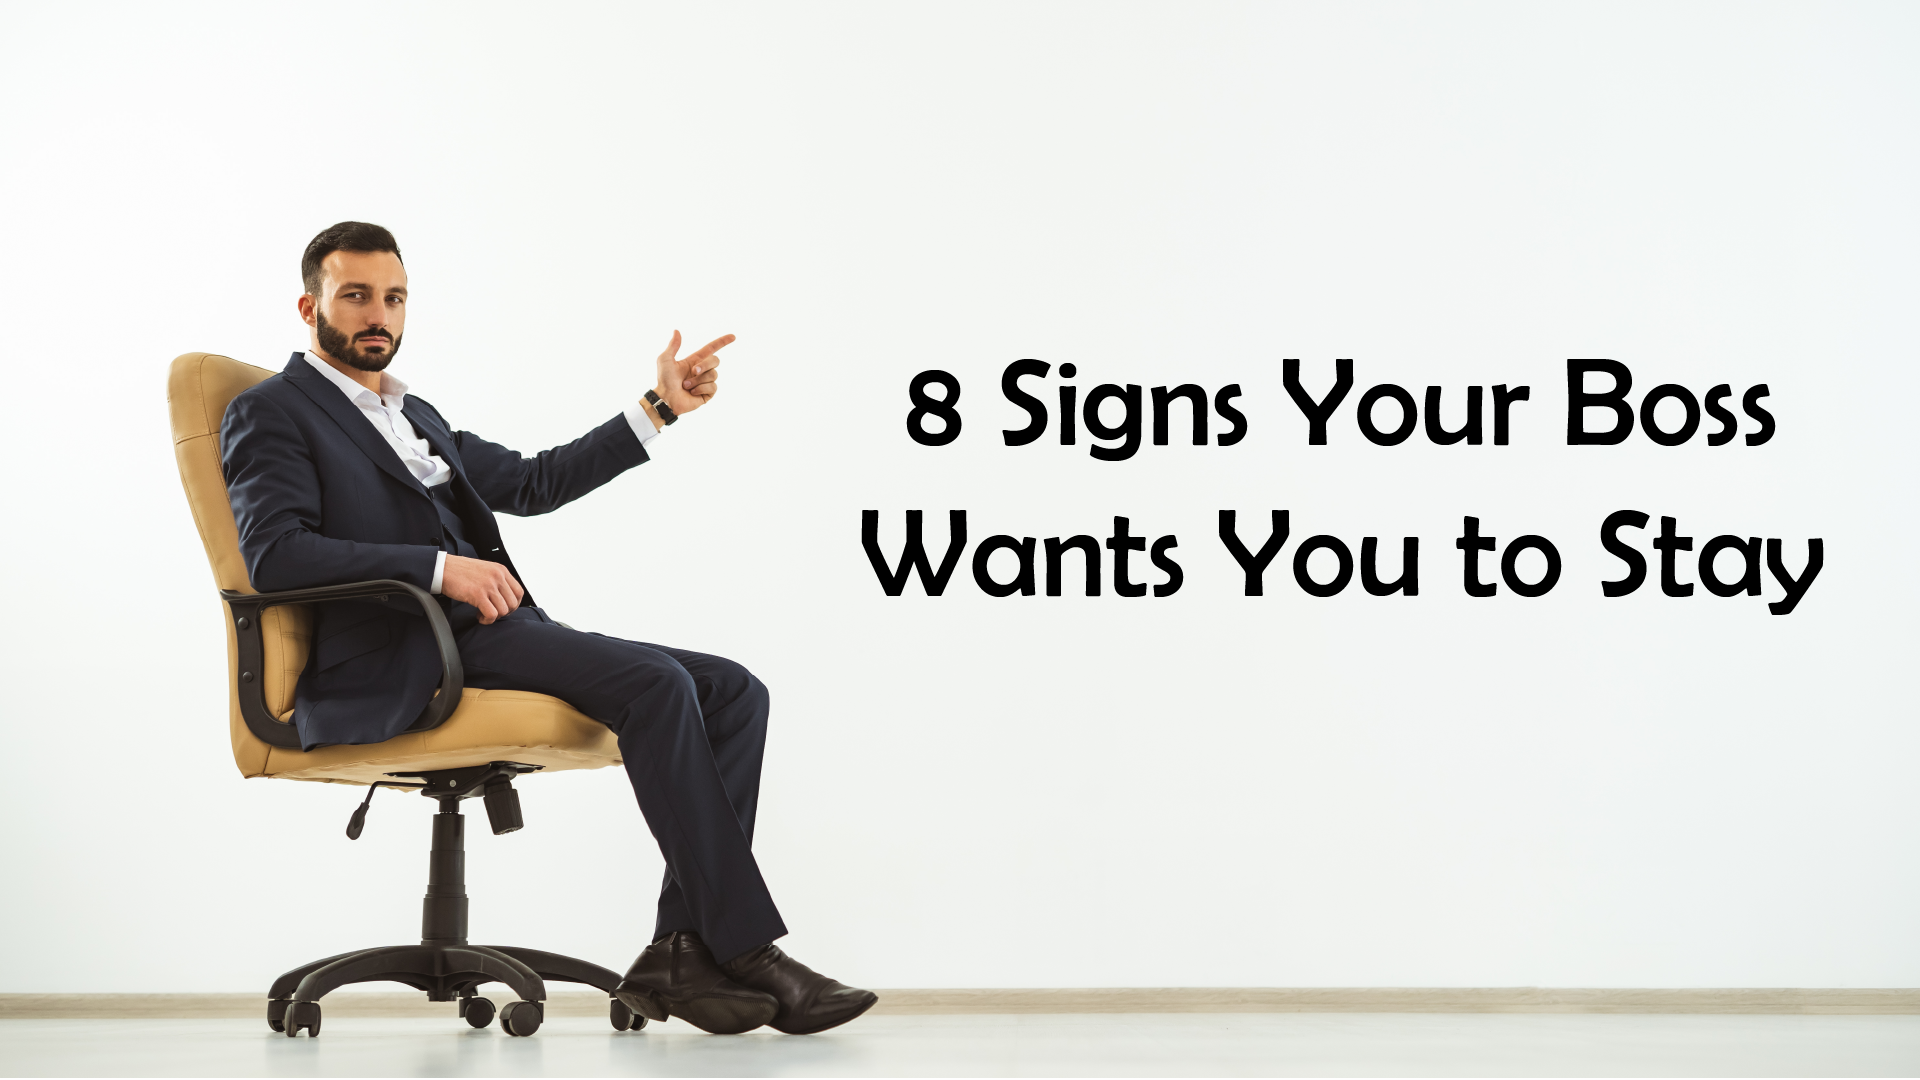 8 Signs Your Boss Wants You to Stay